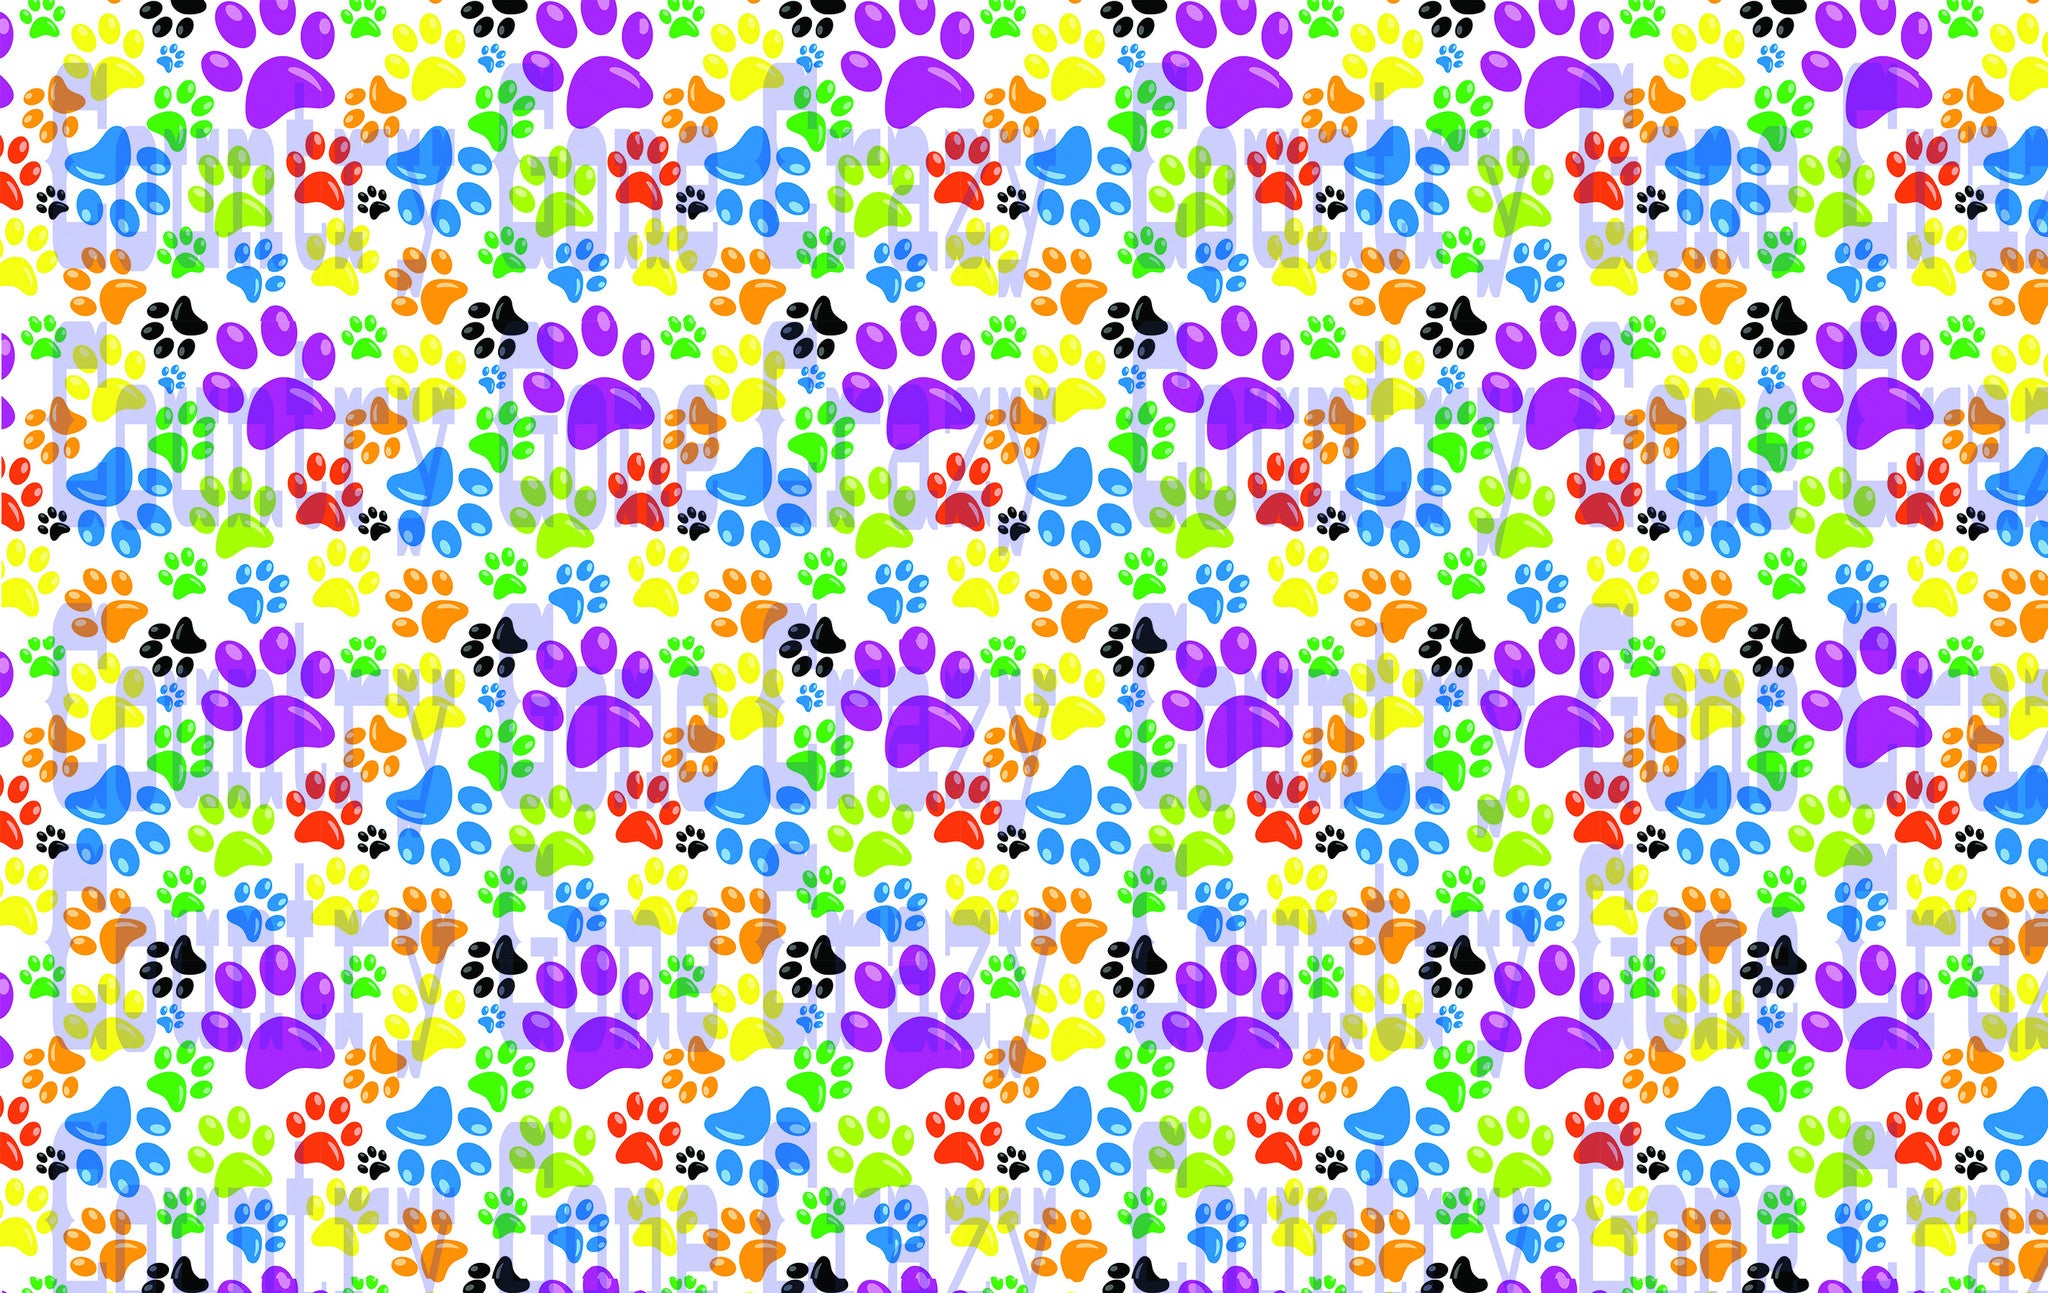 AP010 - Multi-Colored Paw Prints-Country Gone Crazy-Country Gone Crazy